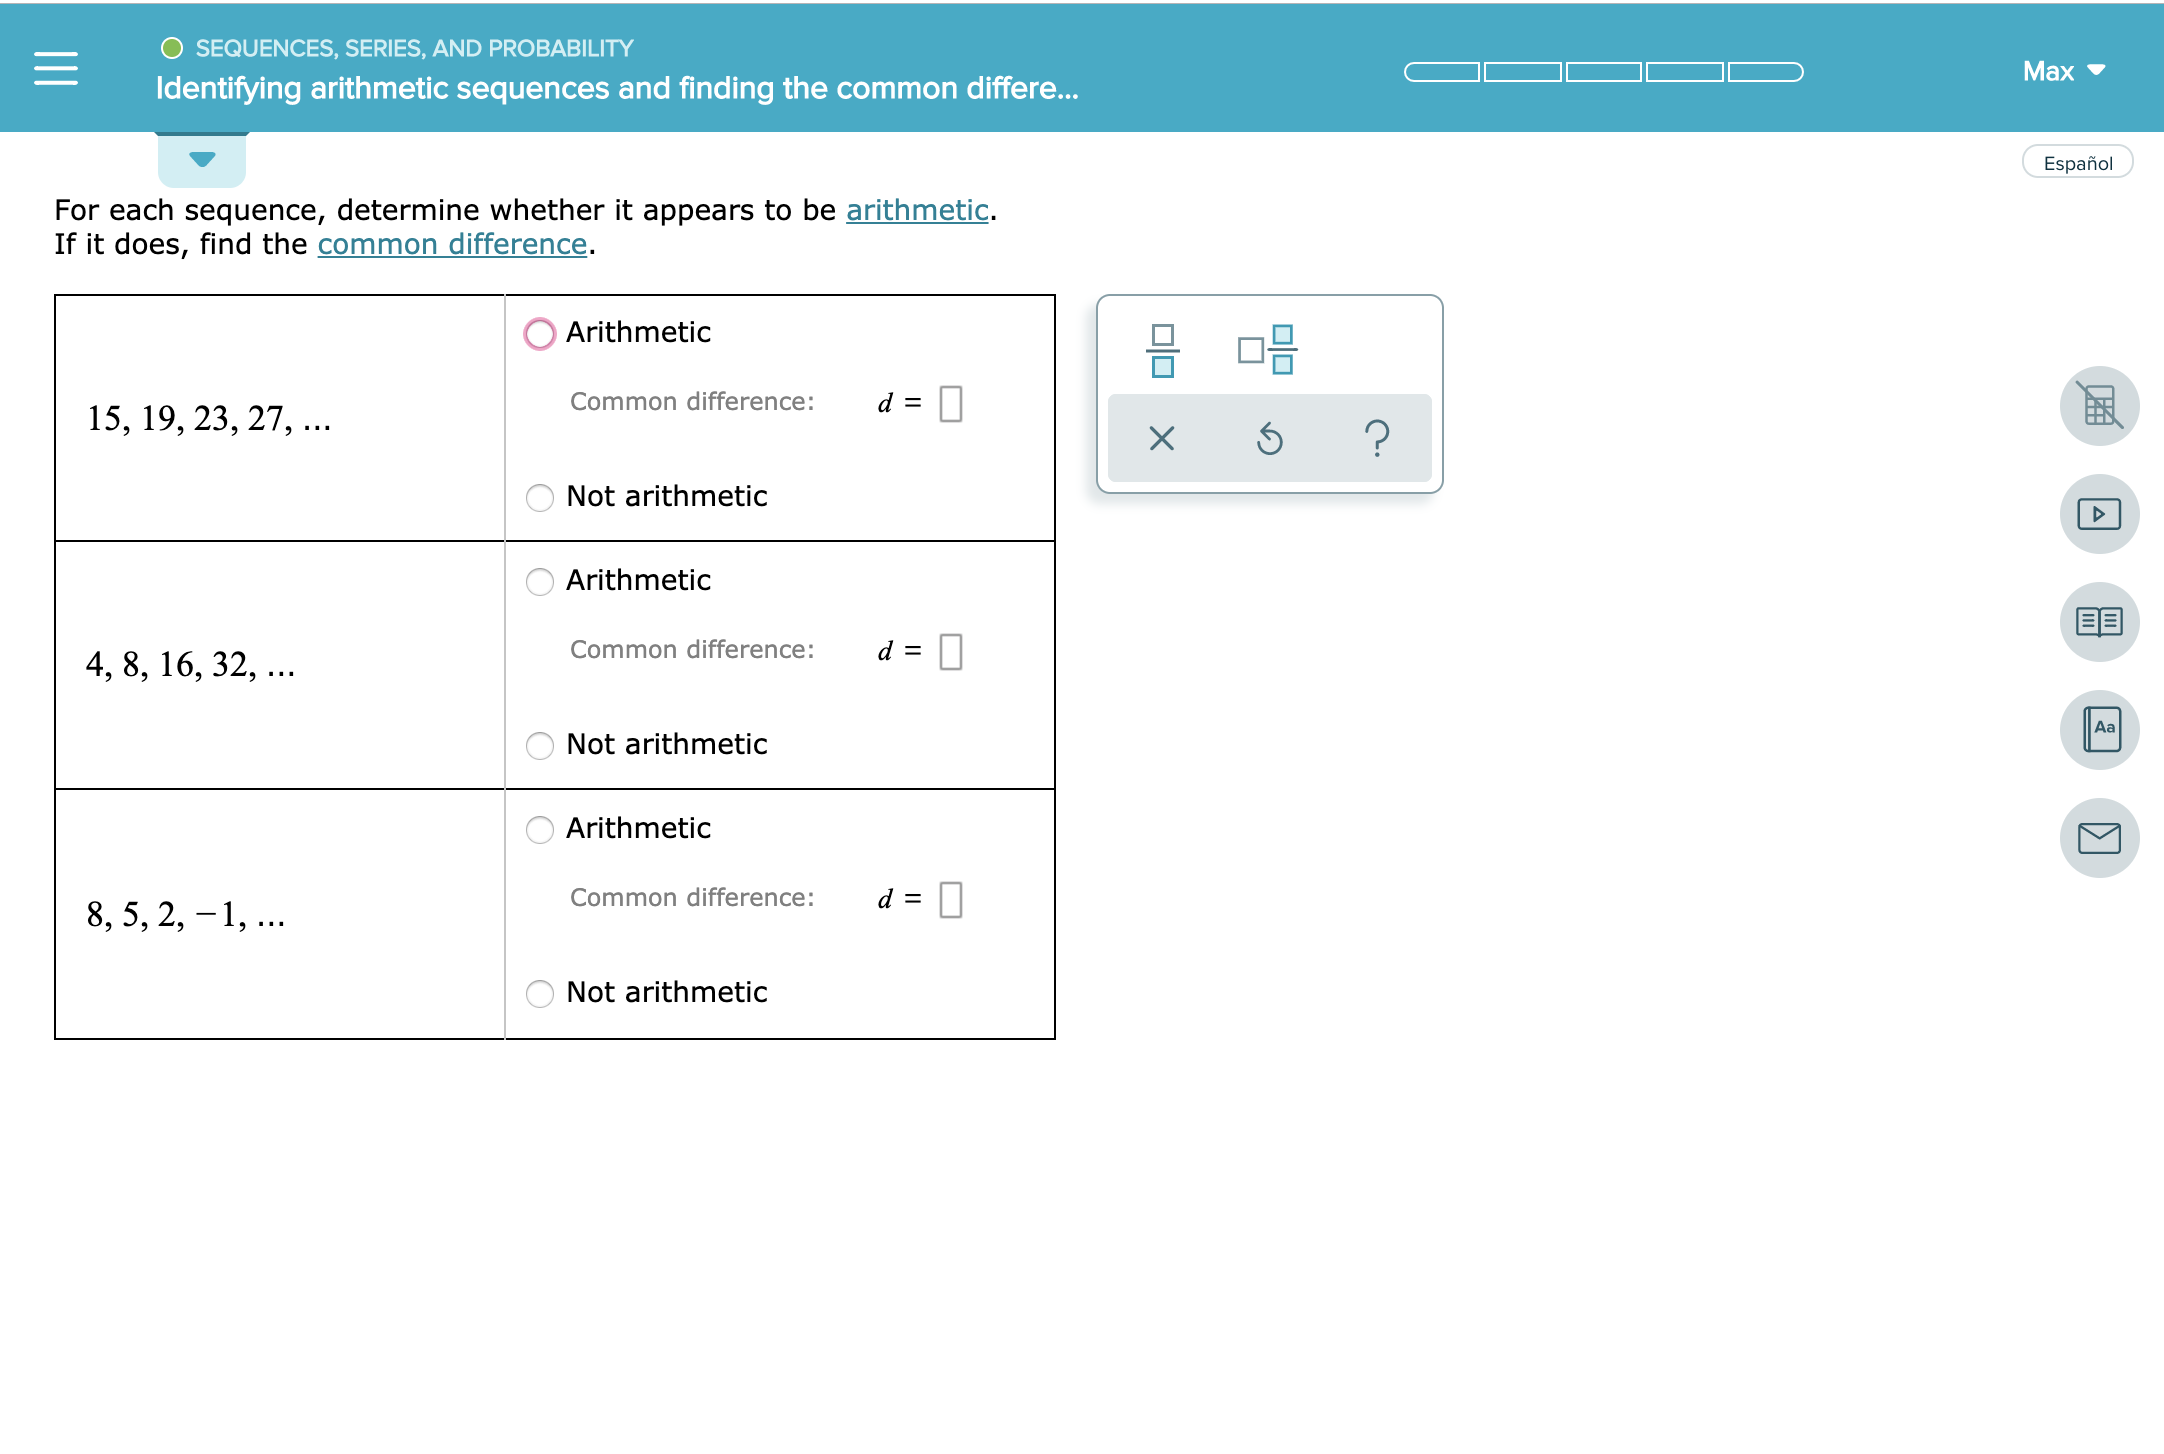 SEQUENCES, SERIES, AND PROBABILITY
Мax
Identifying arithmetic sequences and finding the common differe...
Español
For each sequence, determine whether it appears to be arithmetic.
If it does, find the common difference.
Arithmetic
Common difference:
d
15, 19, 23, 27,...
?
ONot arithmetic
Arithmetic
Common difference:
4, 8, 16, 32, ..
Aa
Not arithmetic
Arithmetic
Common difference:
d
8, 5, 2, 1
Not arithmetic
미□
